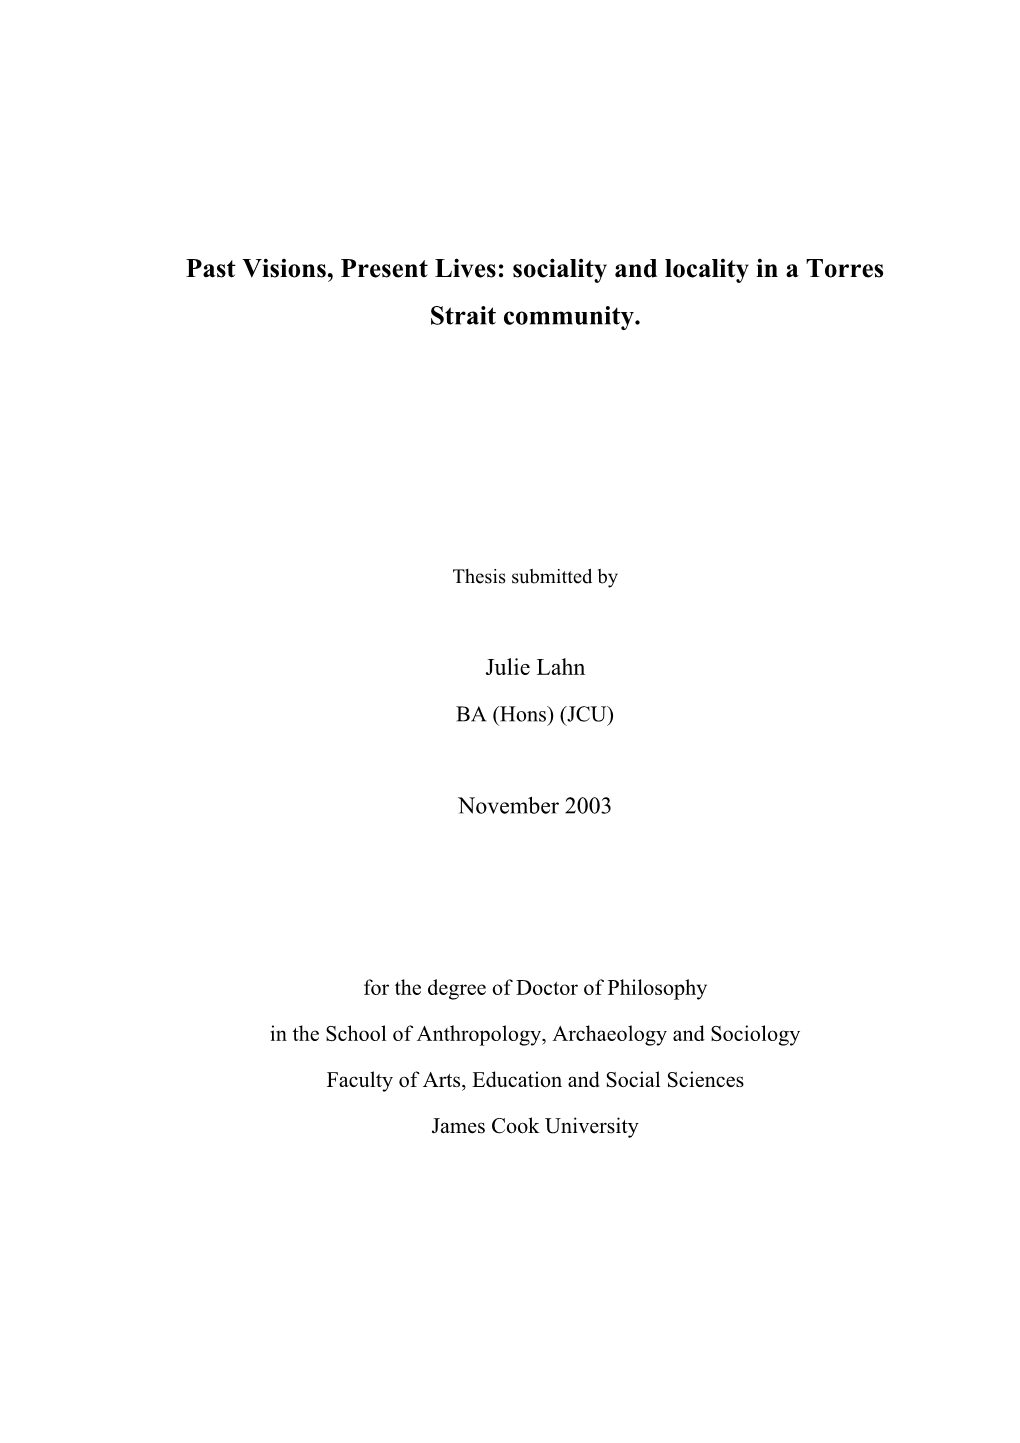 Past Visions, Present Lives: Sociality and Locality in a Torres Strait Community